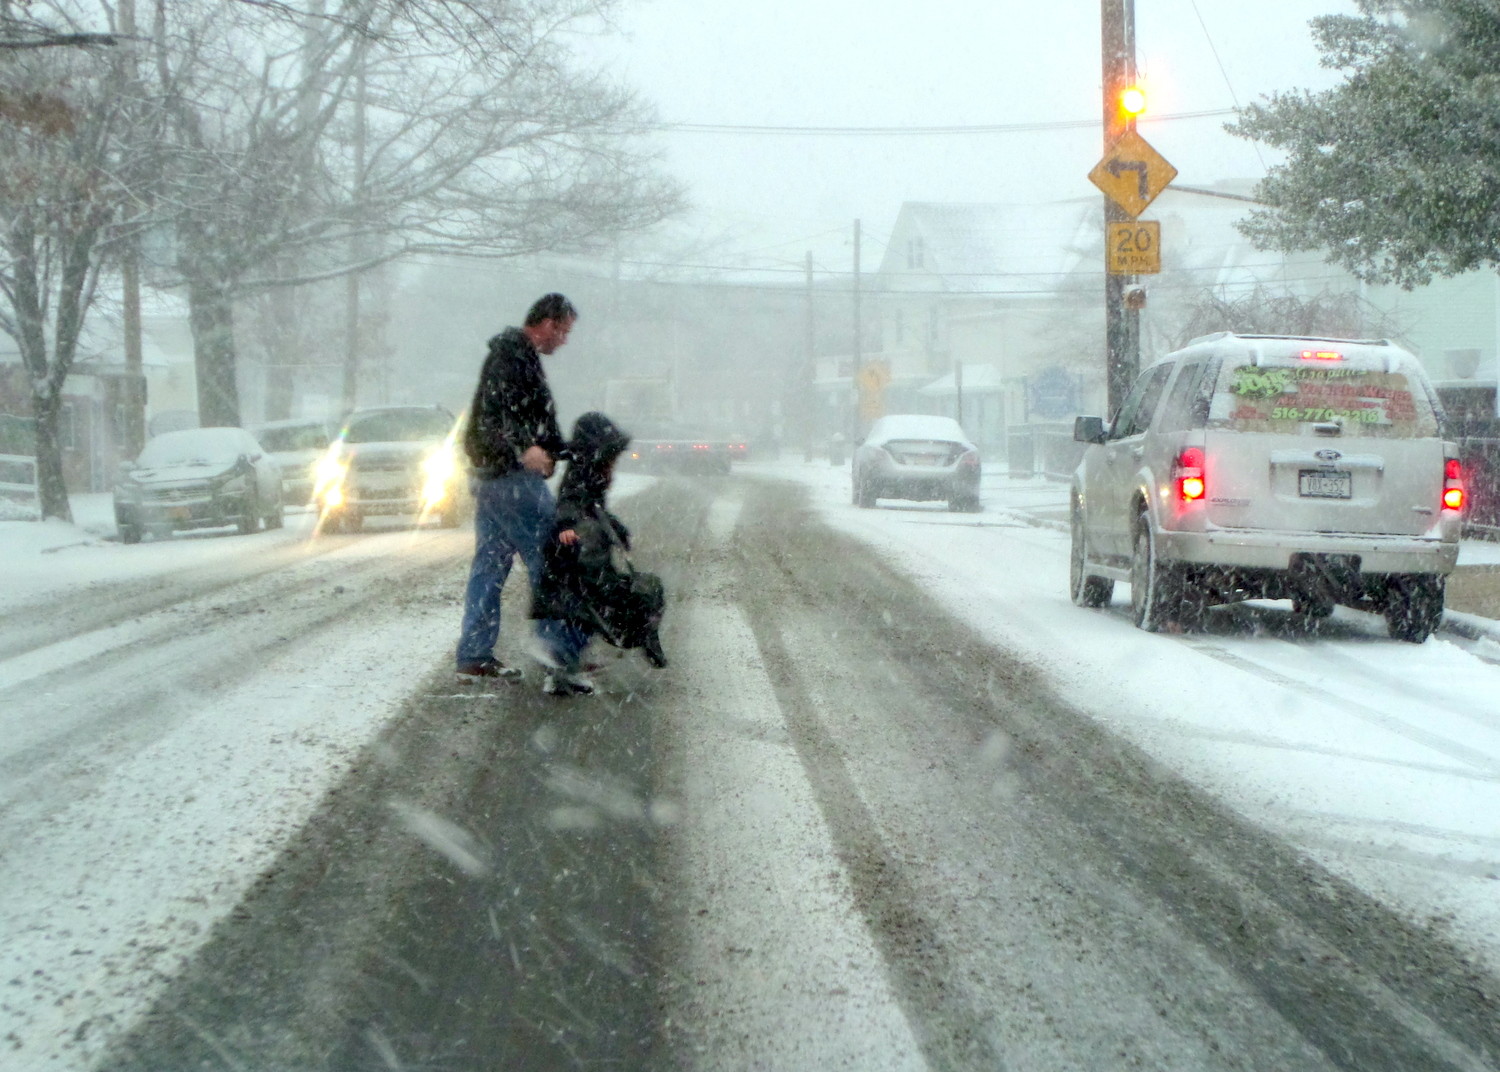 Snowy conditions made for slippery roads — but schools were still open in East Rockaway, Lynbrook, and other communities.